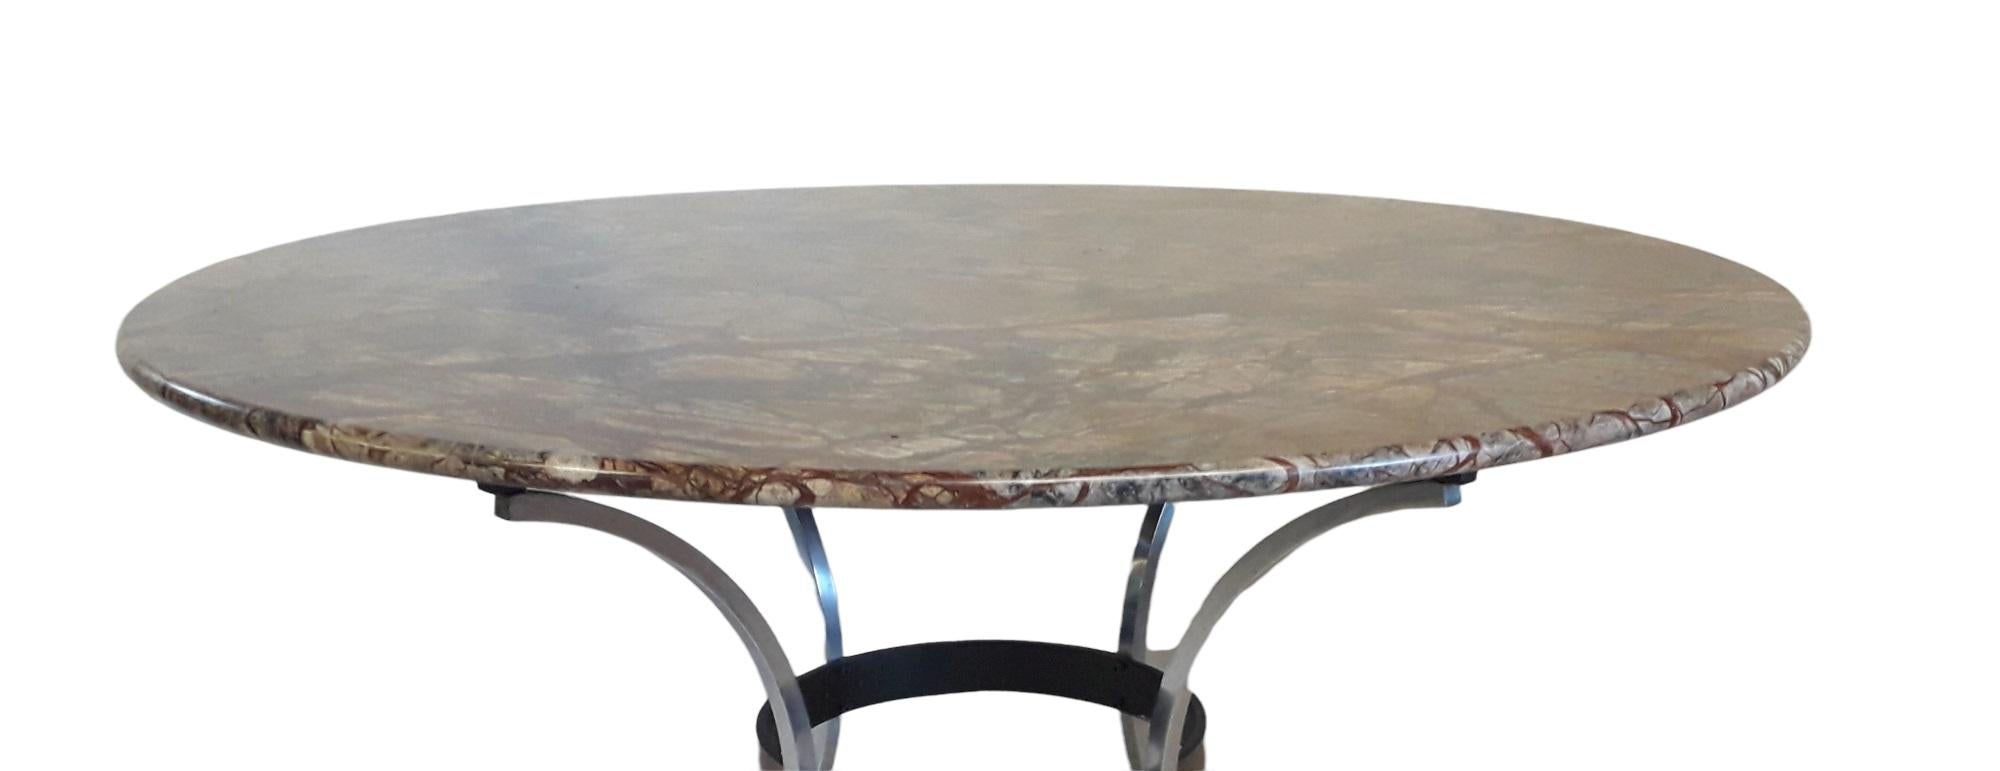 Classical Greek Marble Center Circular Dining Table